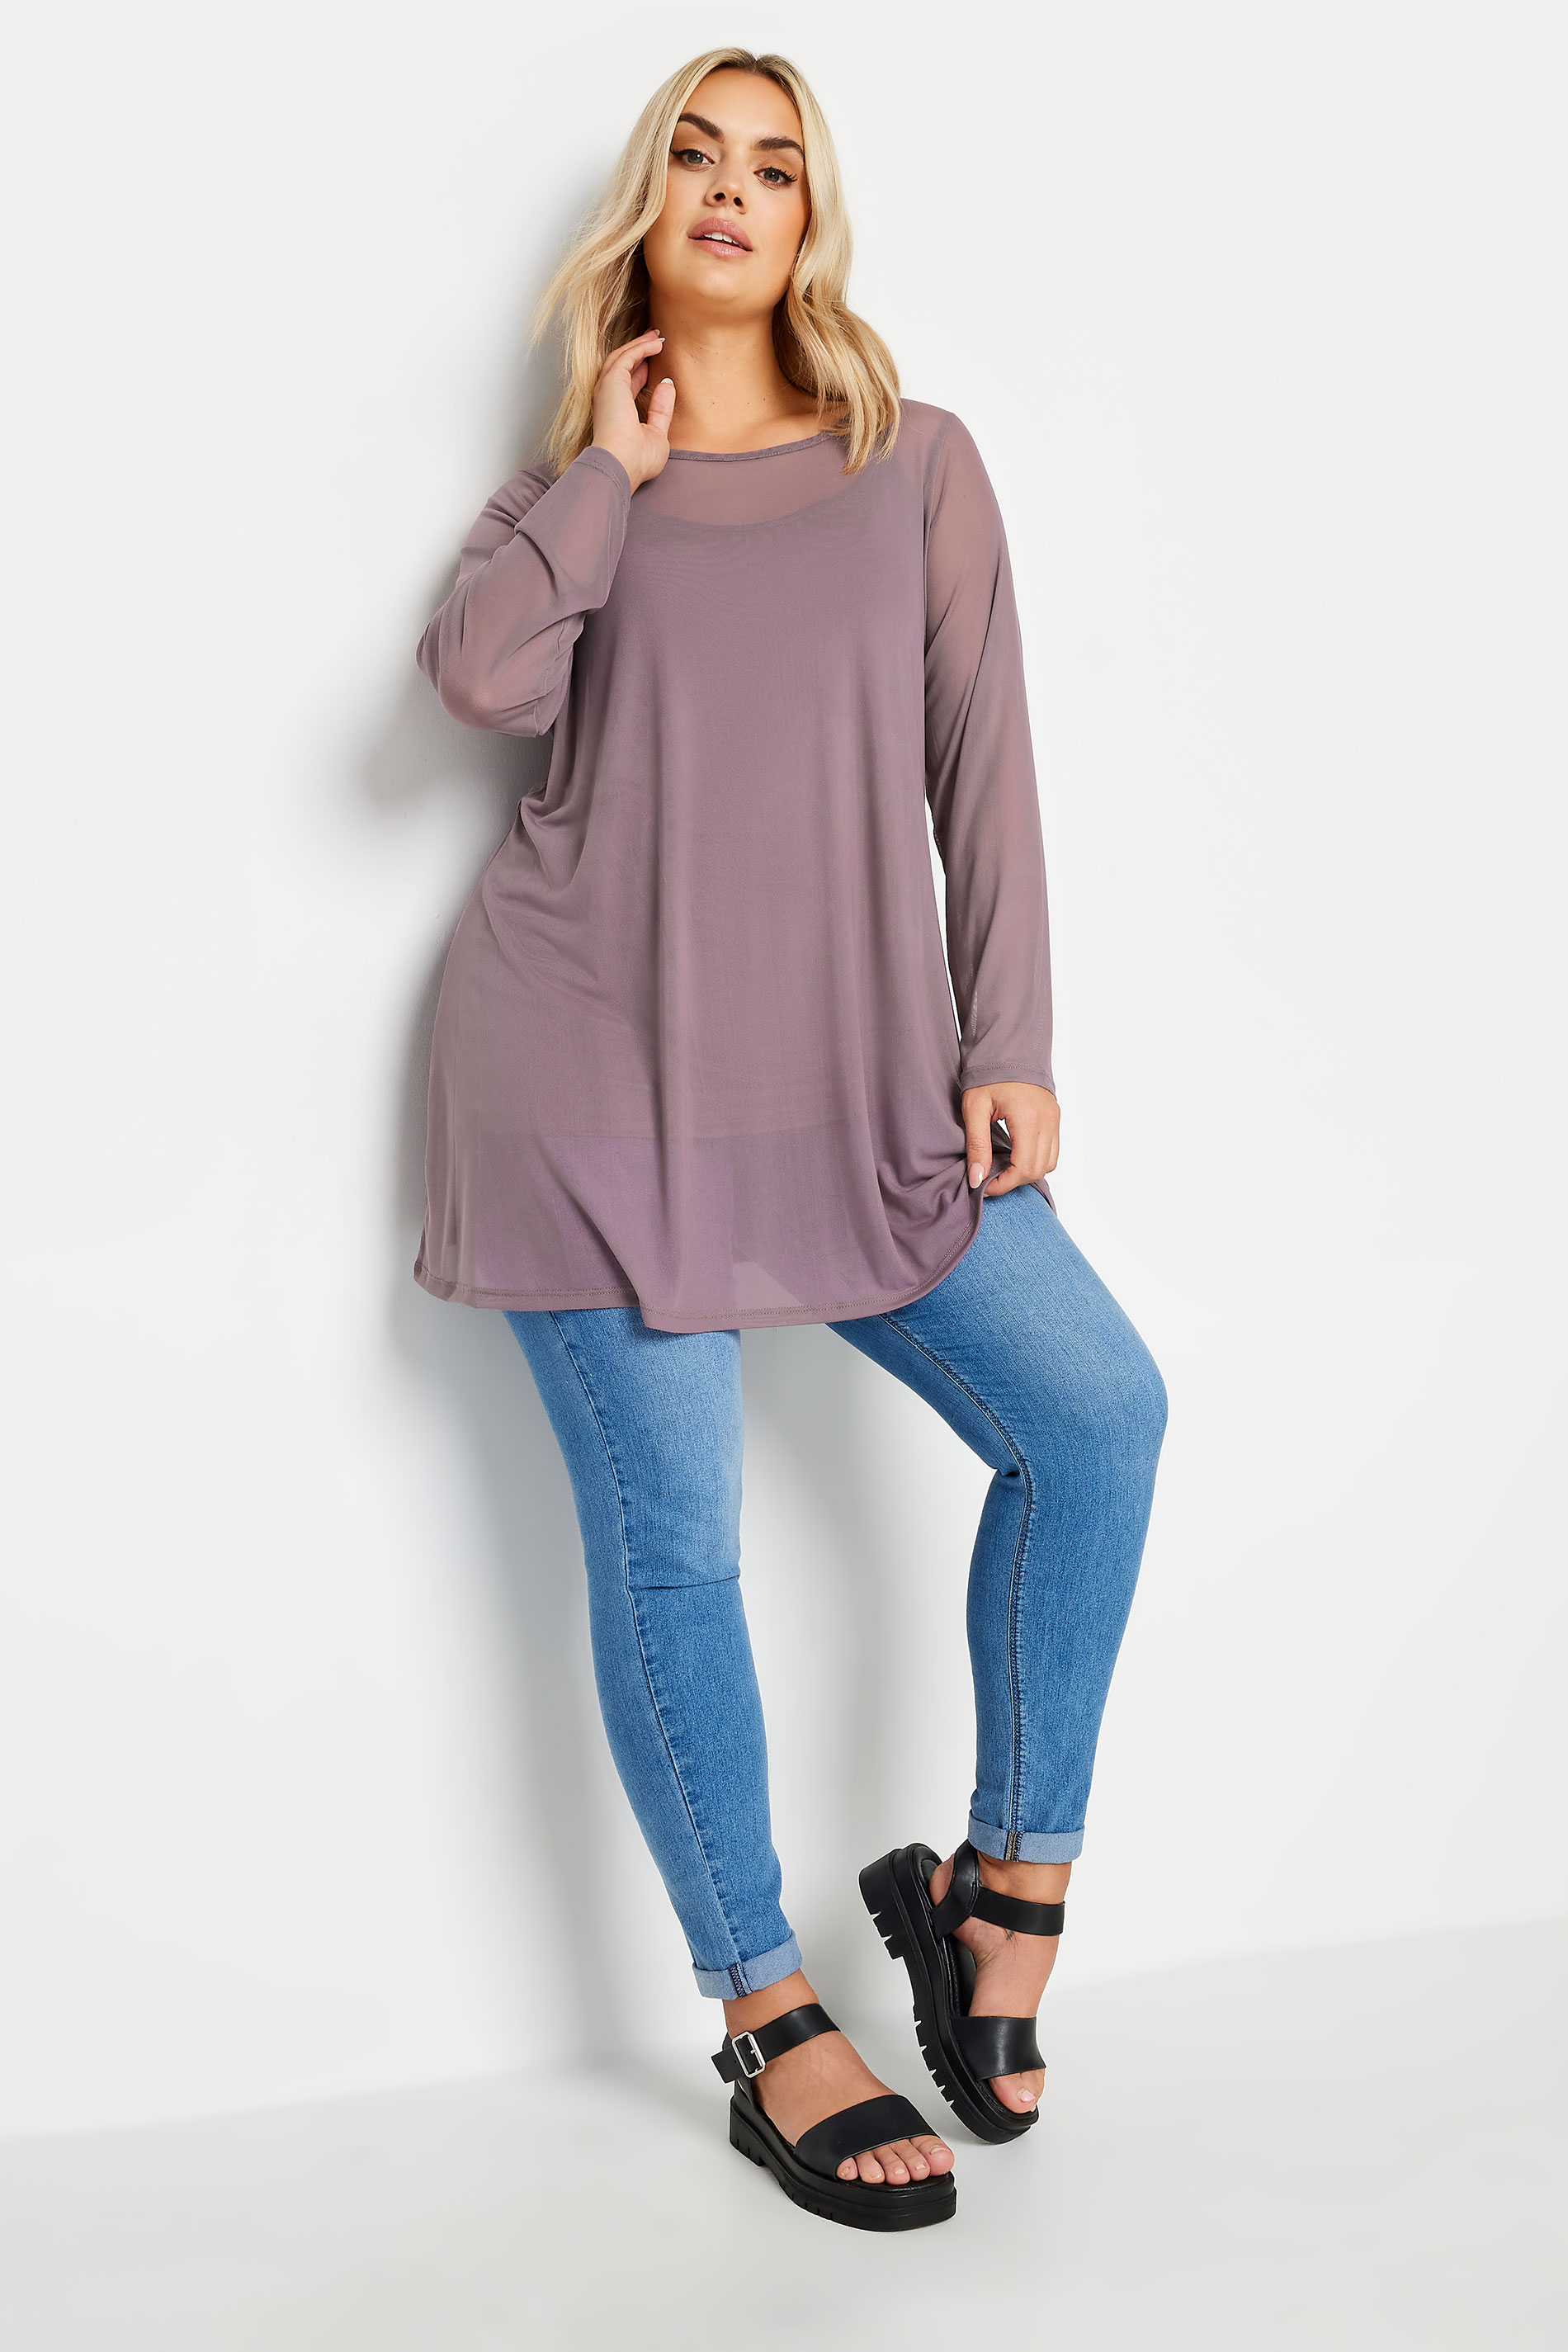 YOURS Plus Size Purple Mesh Swing Top | Yours Clothing 2